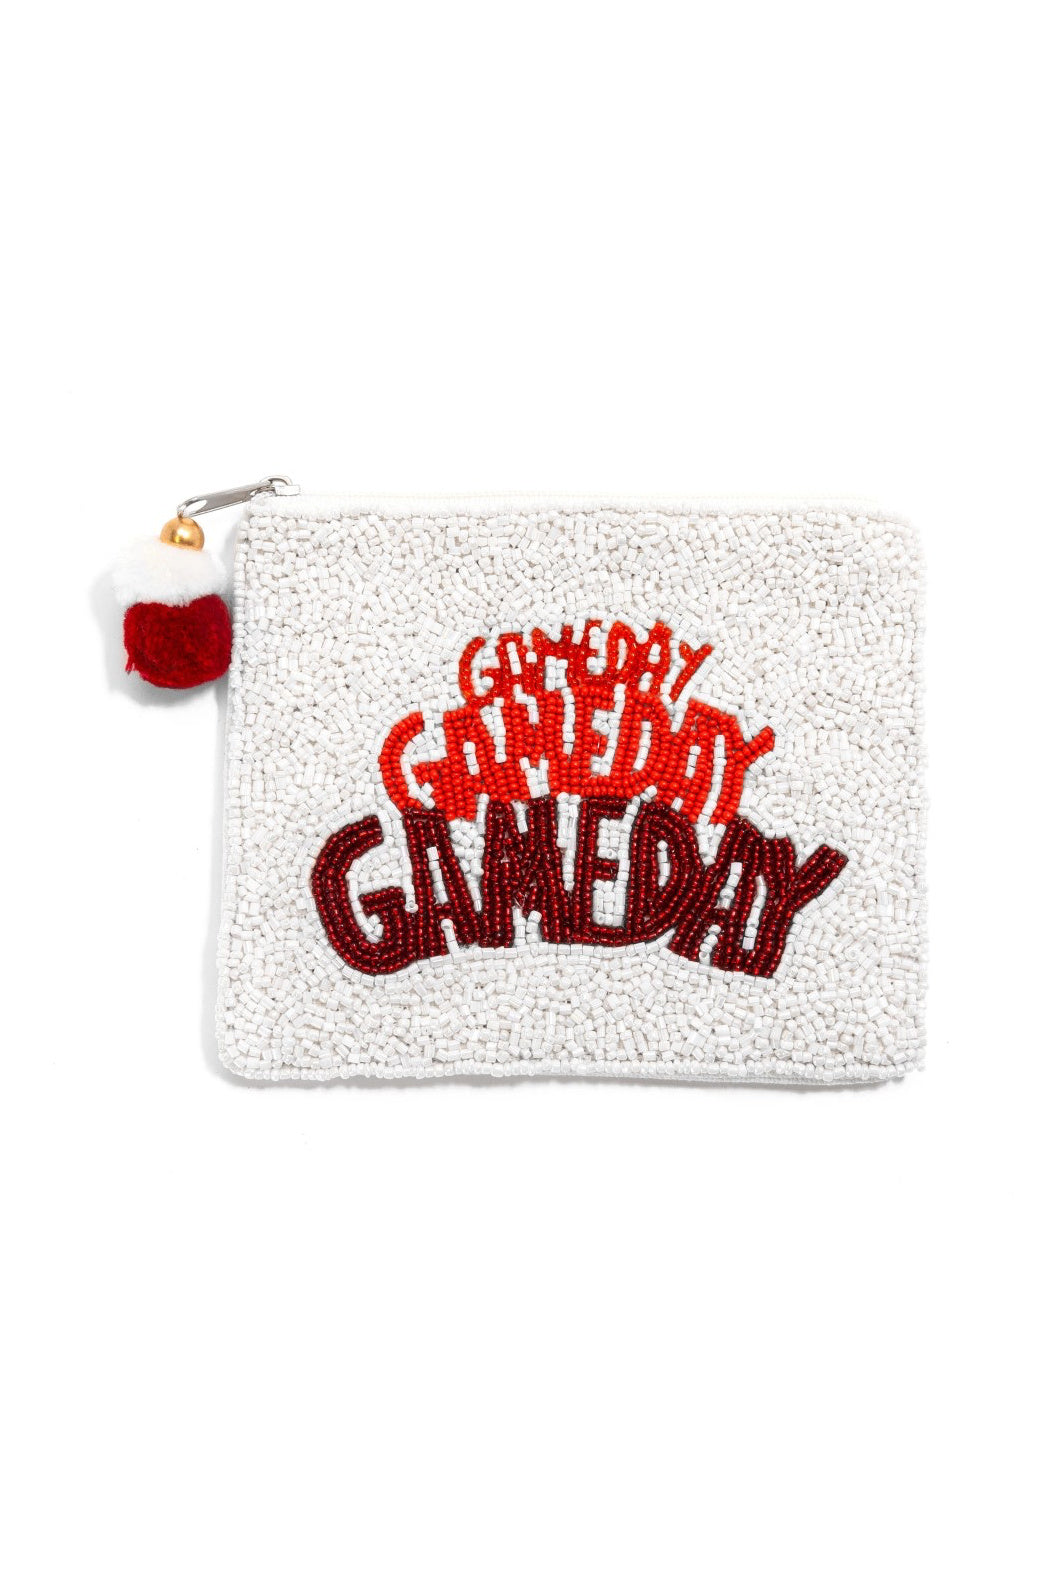 Game Day x 3 Beaded Pouch Bag